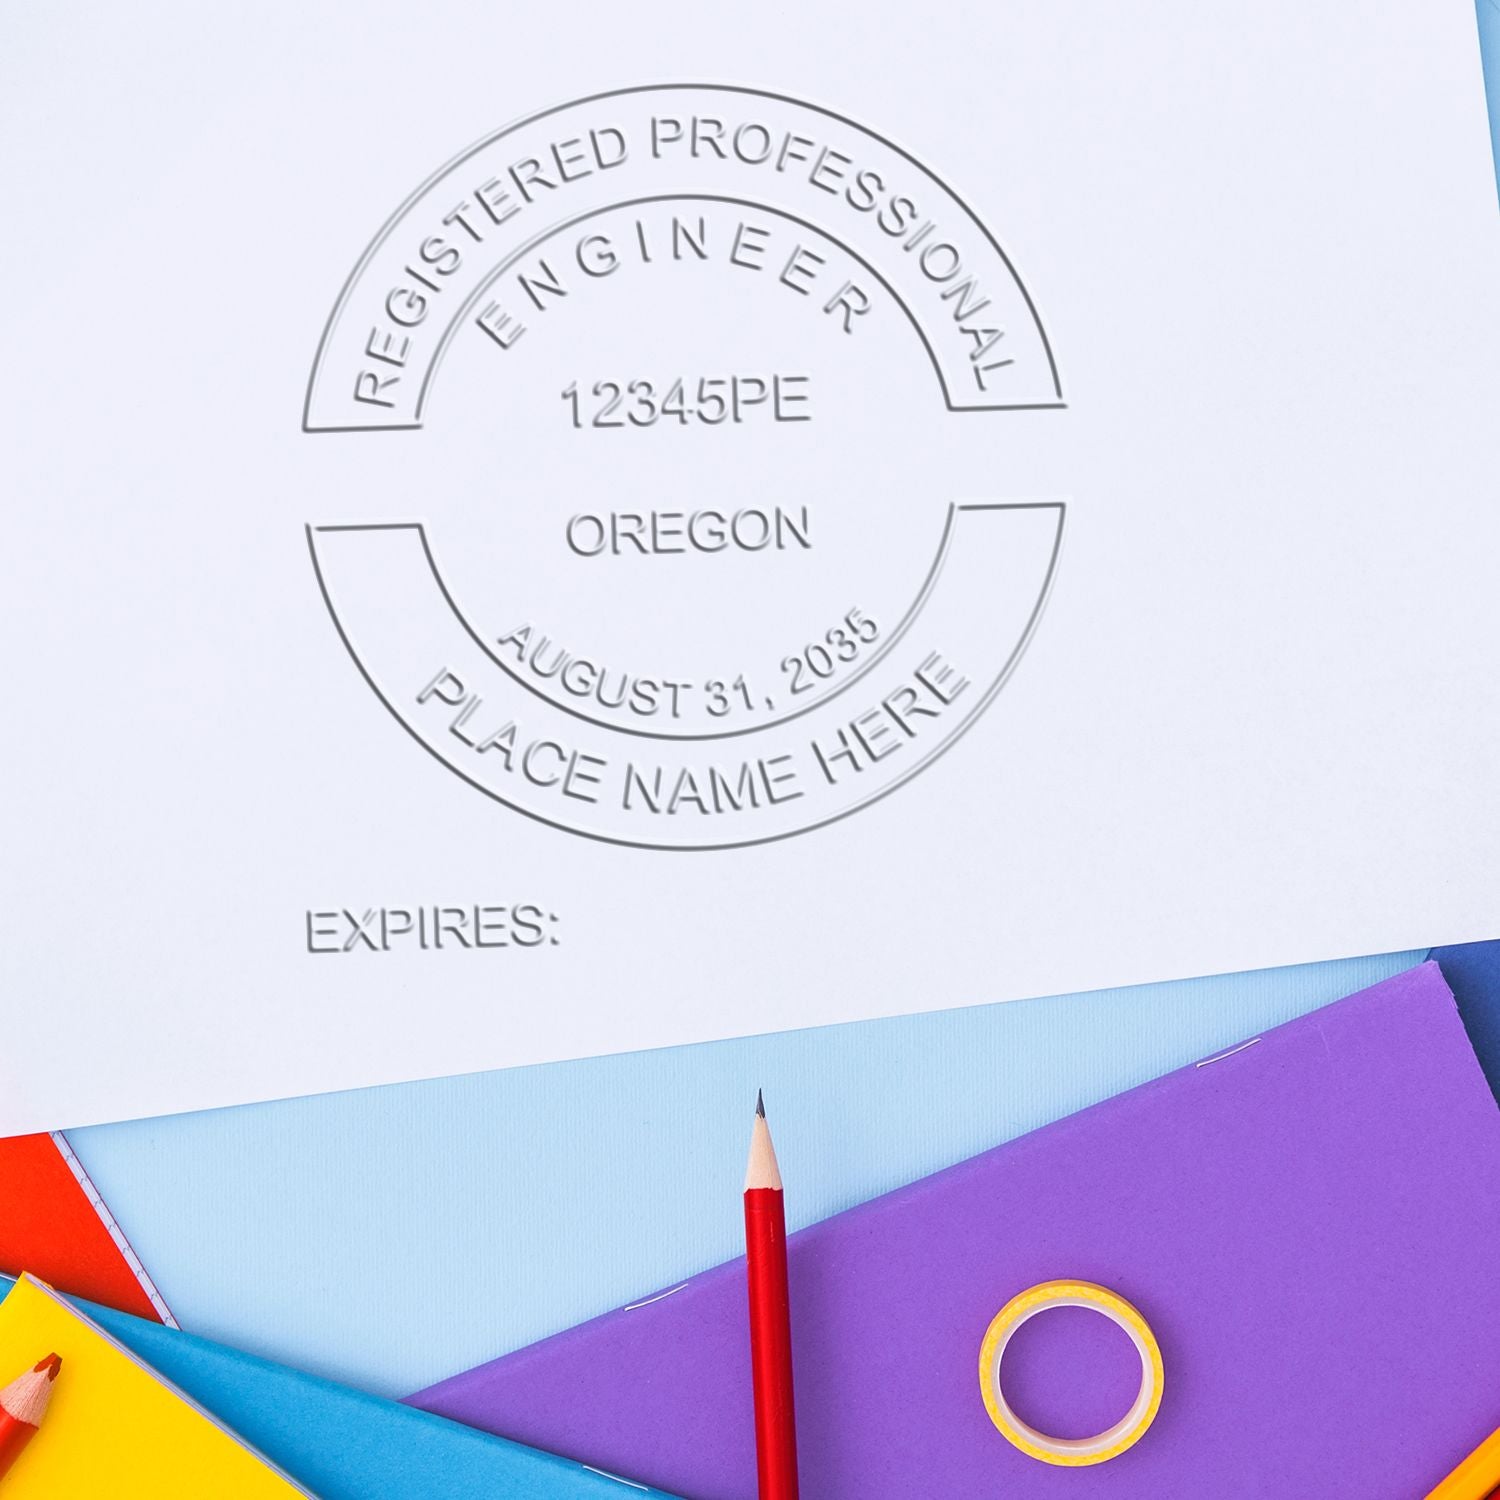 The State of Oregon Extended Long Reach Engineer Seal stamp impression comes to life with a crisp, detailed photo on paper - showcasing true professional quality.